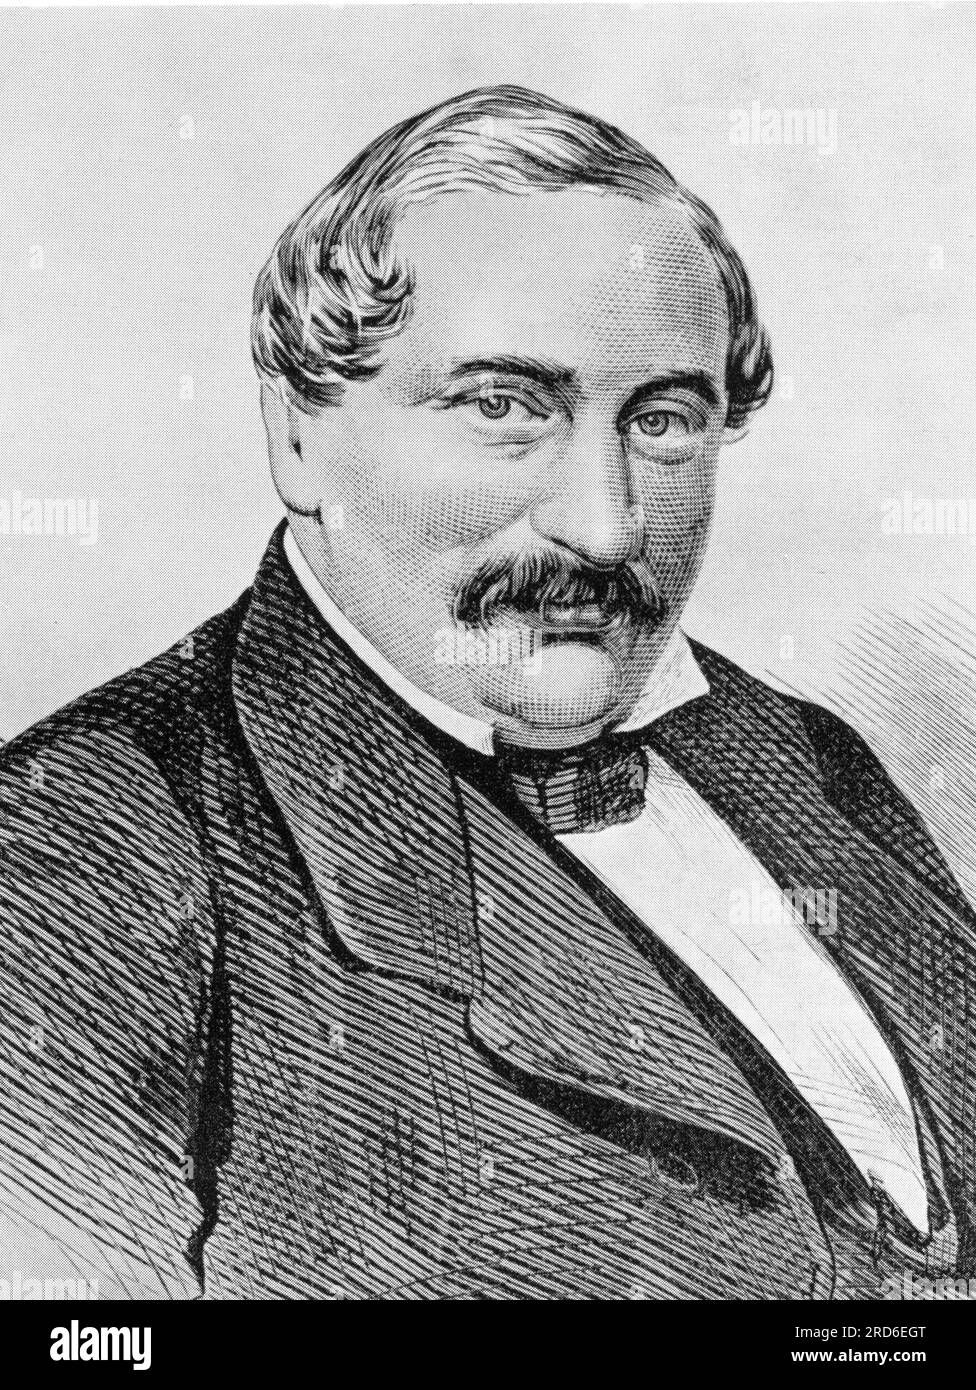 Wolff, Bernhard, 3.3.1811 - 11.5.1879, German businessman (press), lithograph, 19th century, ADDITIONAL-RIGHTS-CLEARANCE-INFO-NOT-AVAILABLE Stock Photo